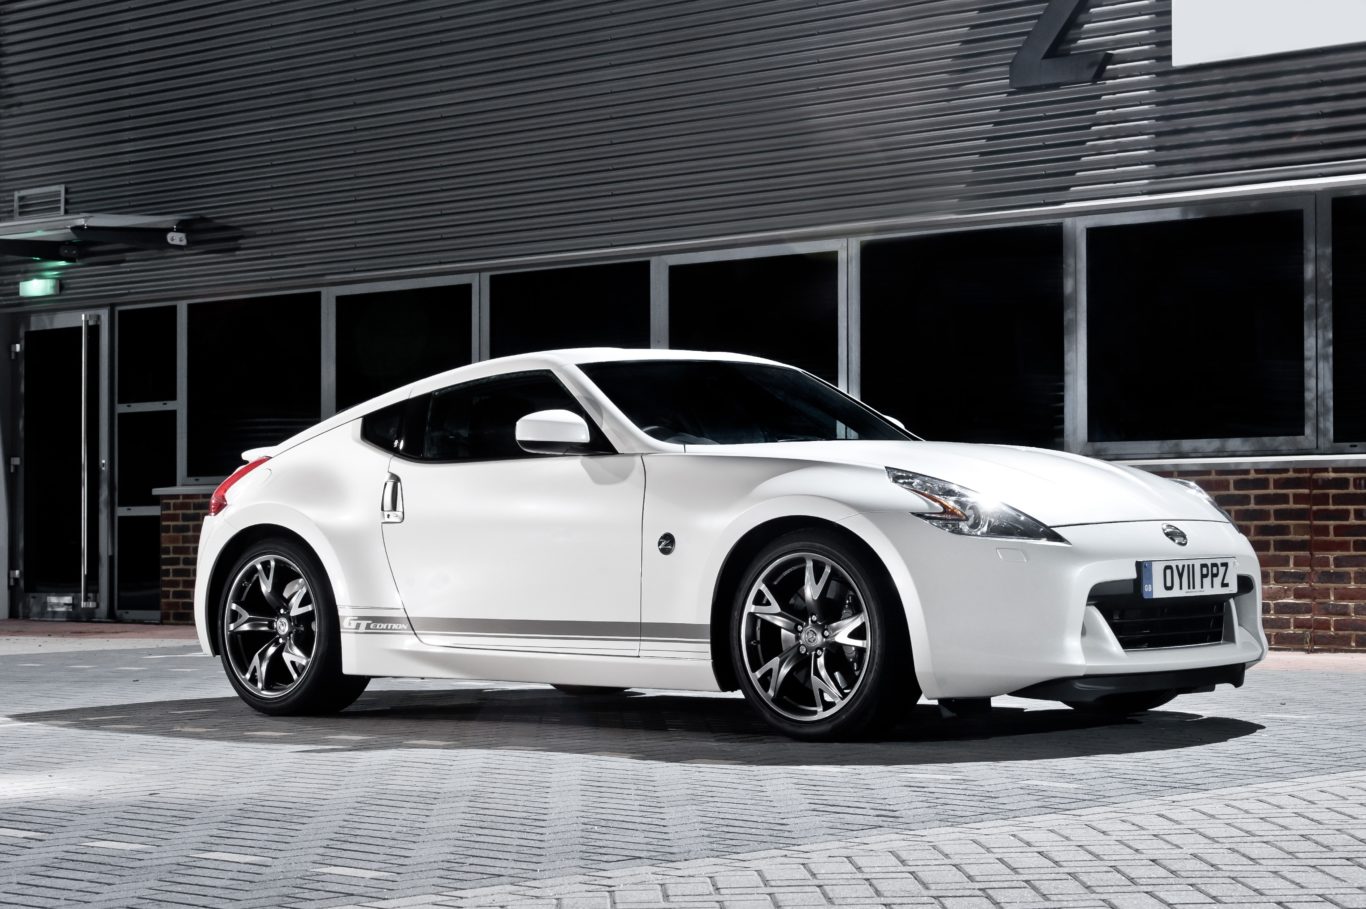 The 370Z features a punchy V6 engine